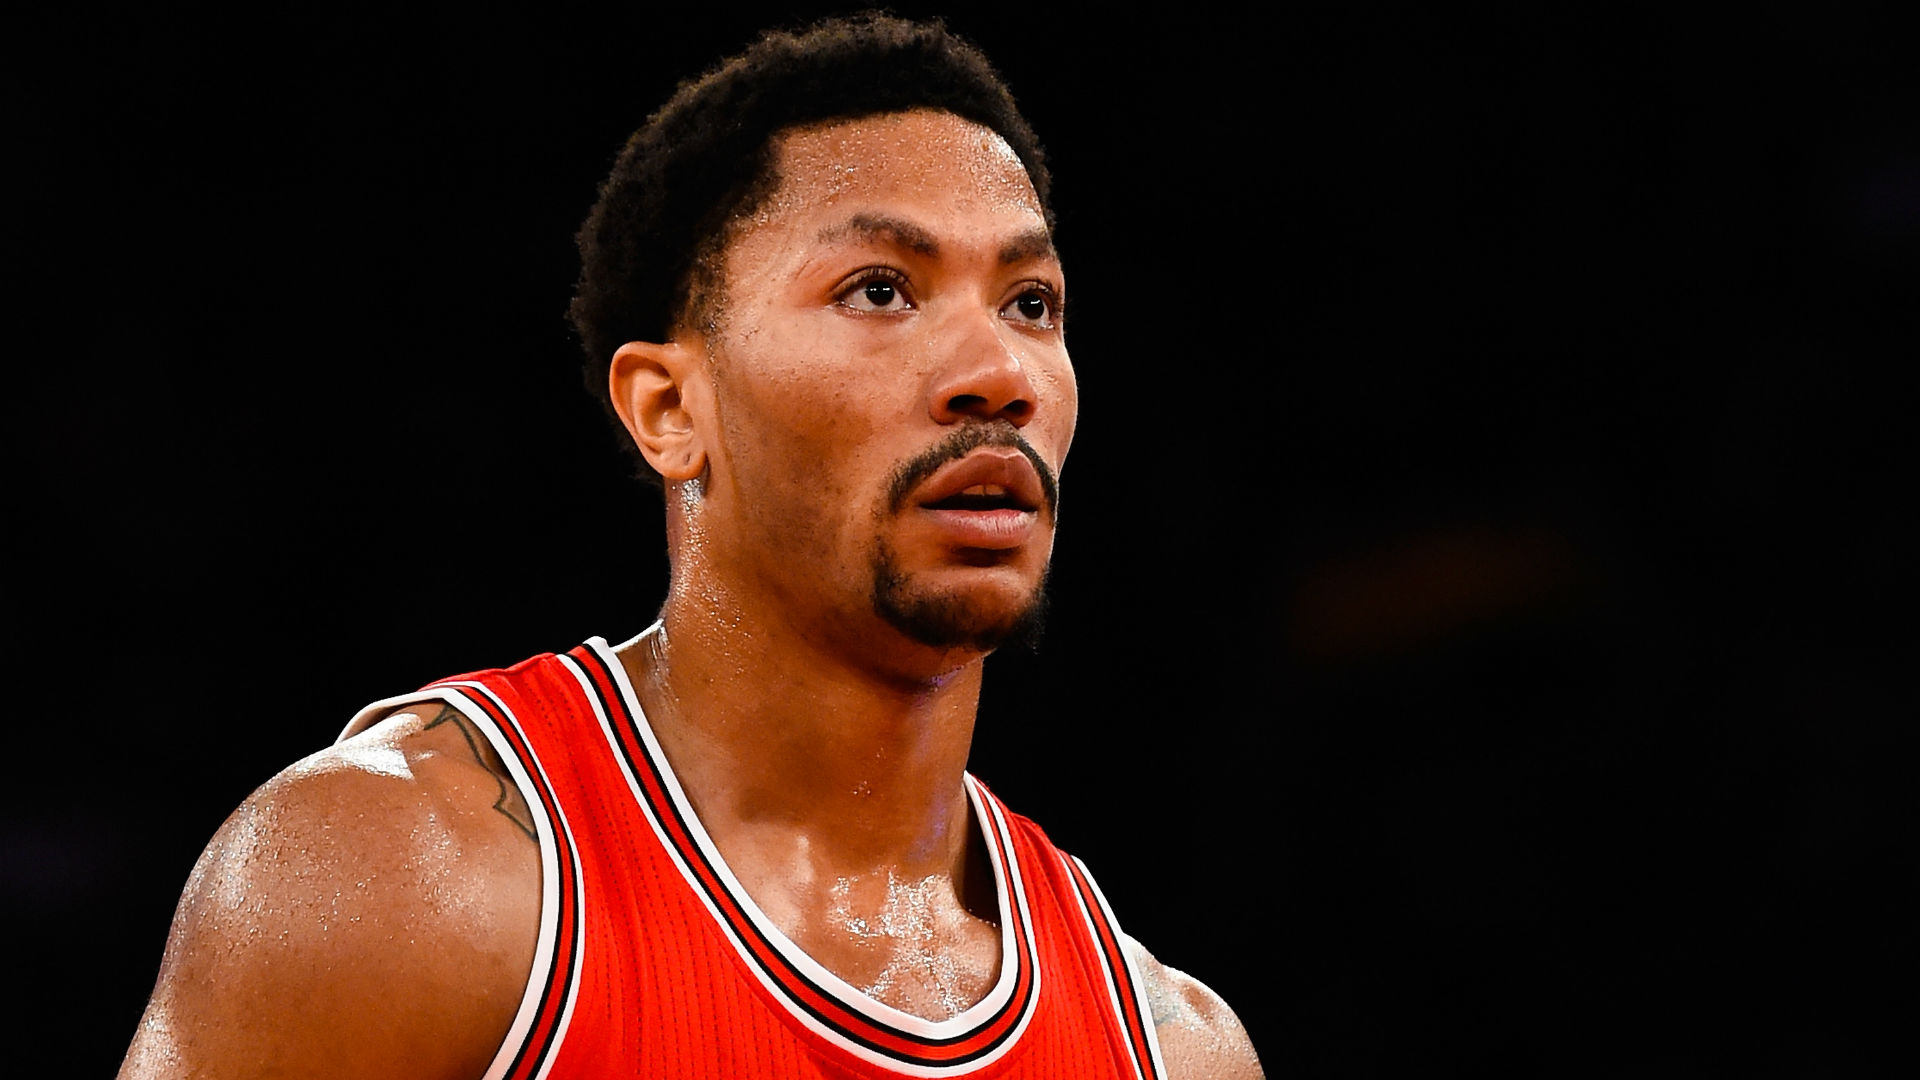 Court documents: Derrick Rose denies rape allegations, says sex was consensual | NBA ...